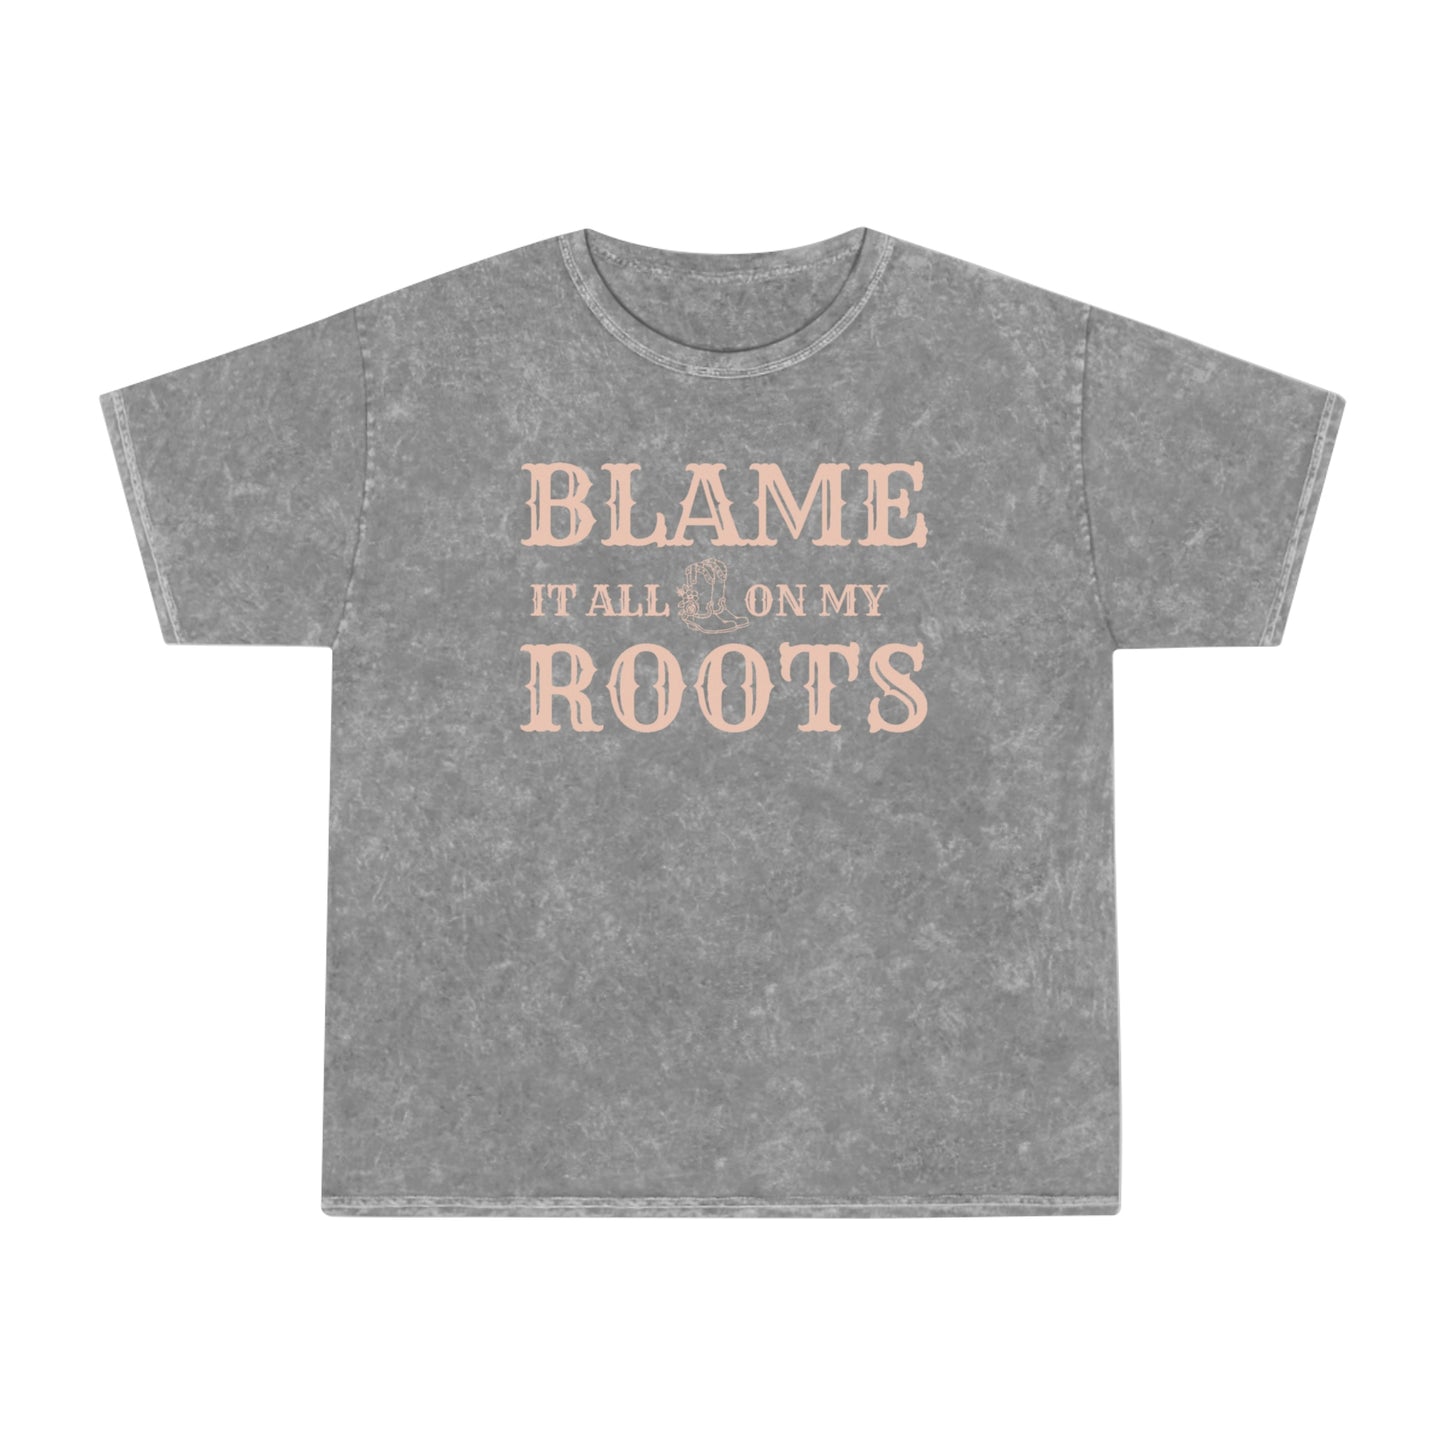 "Blame it all on my Roots" Mineral Wash T-Shirt